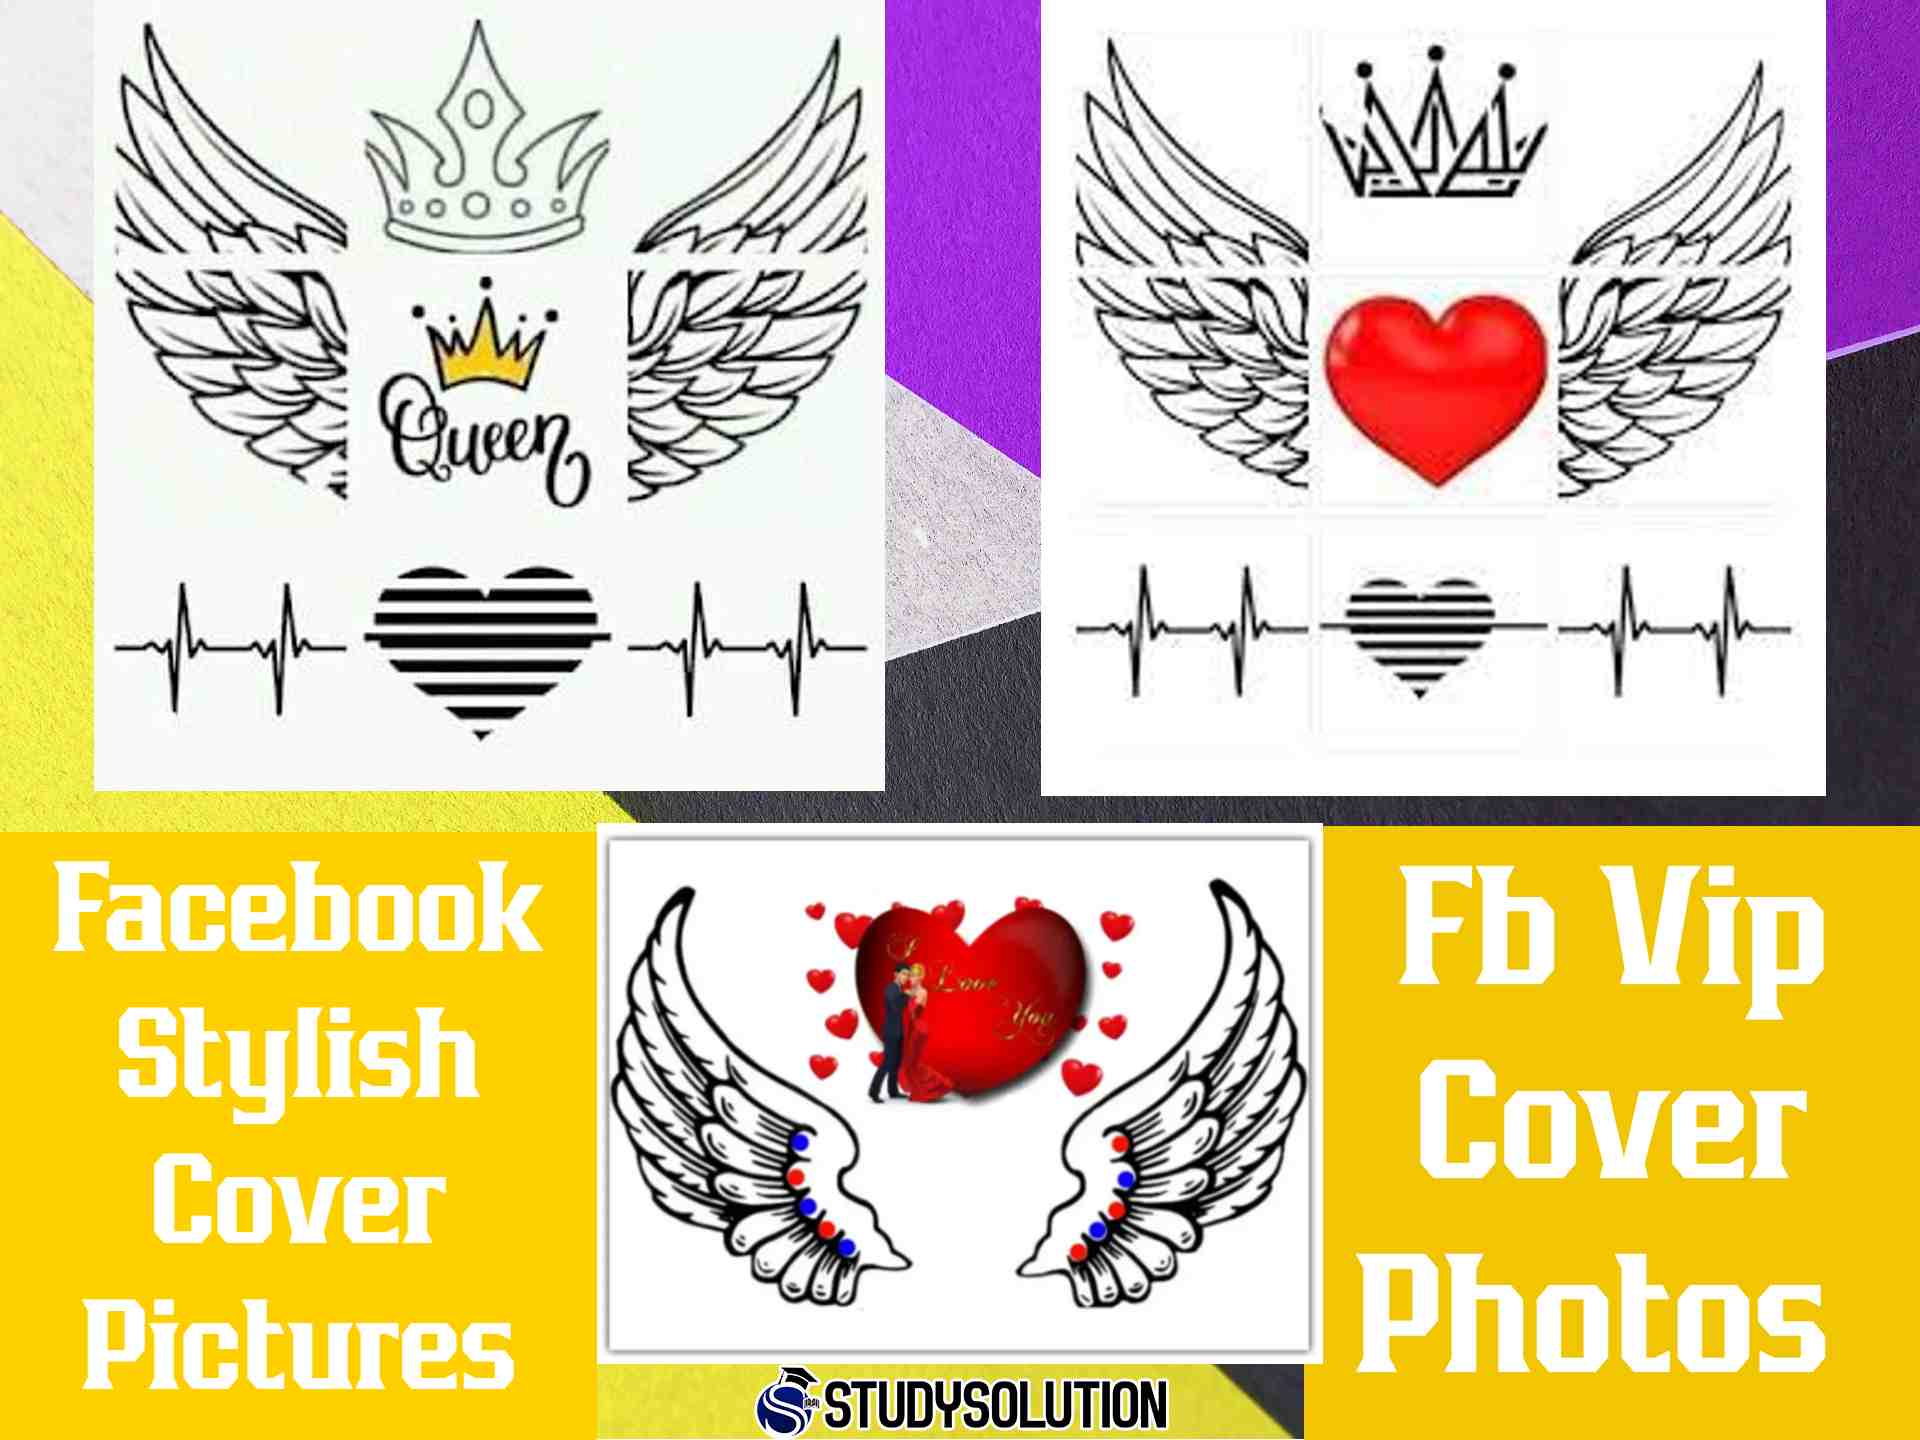 Facebook Stylish Cover Pictures